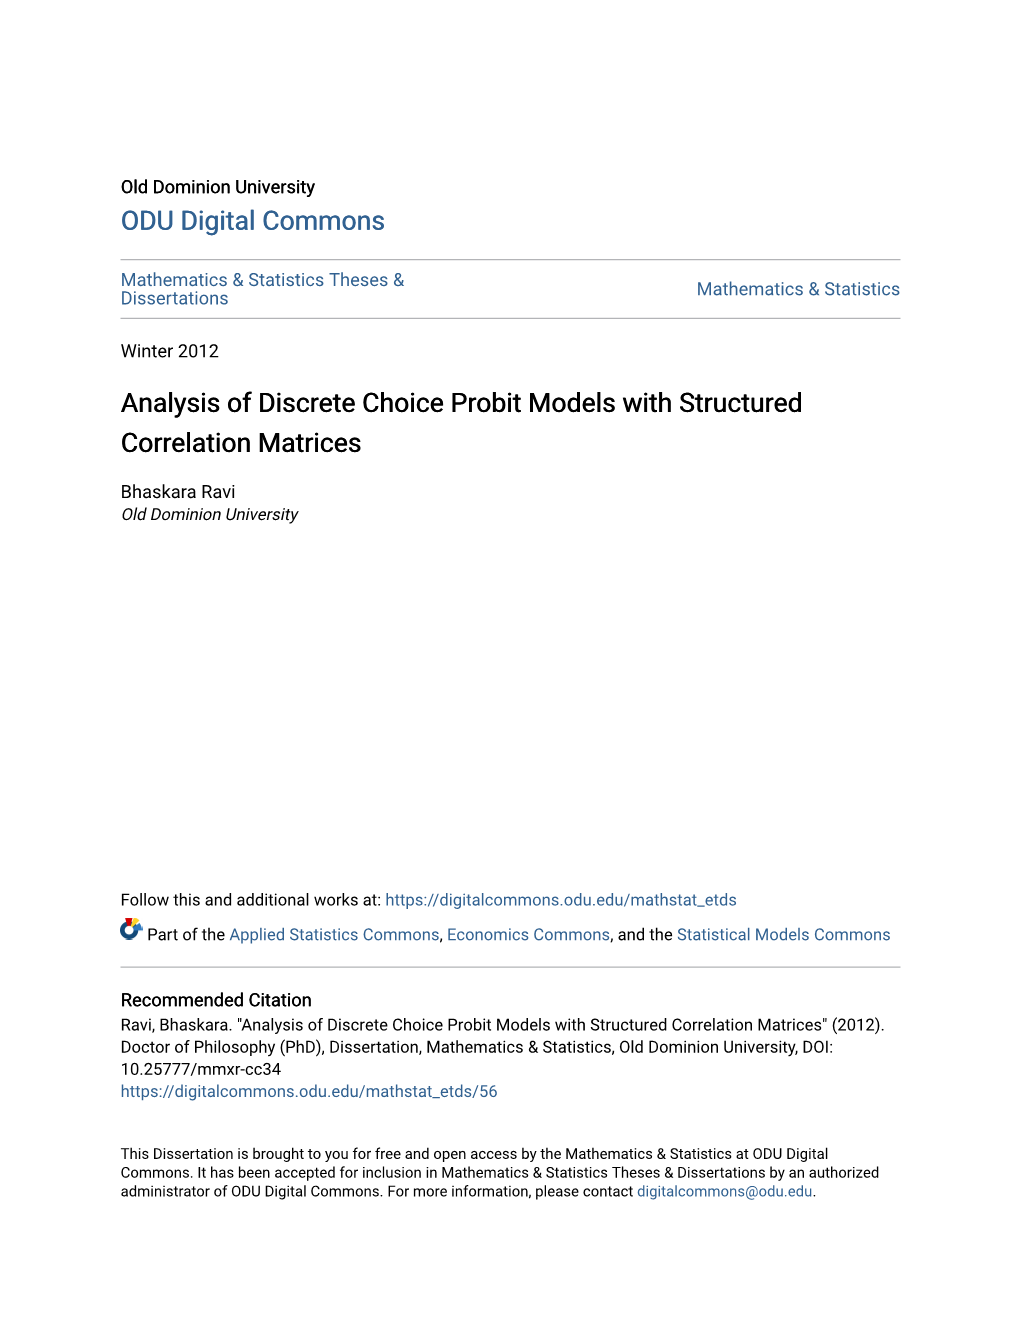 Analysis of Discrete Choice Probit Models with Structured Correlation Matrices